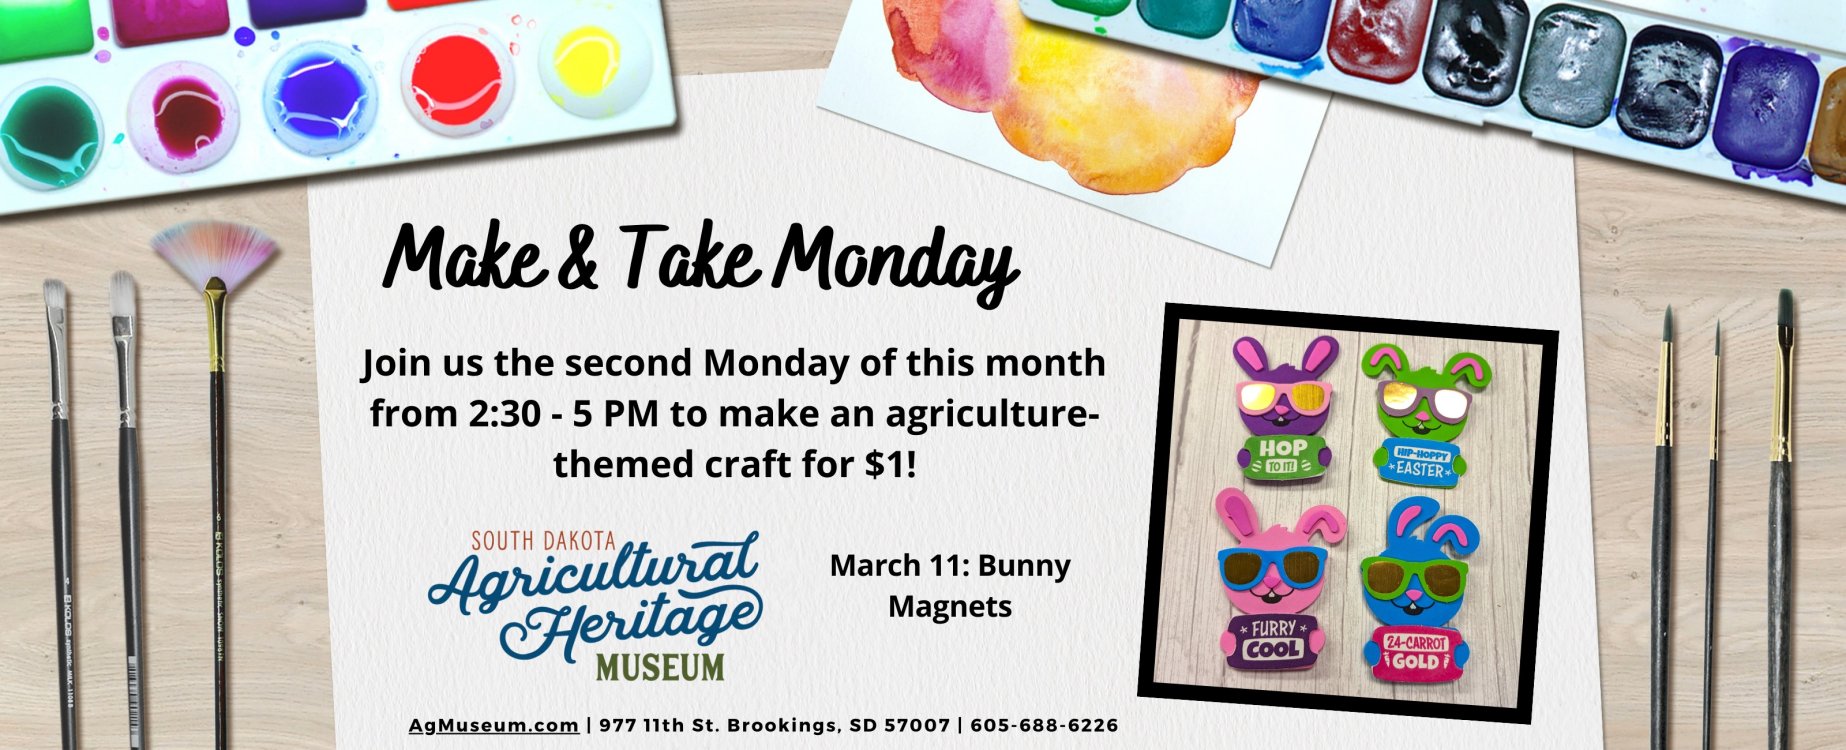 March 11 Make & Take Monday: Bunny Magnets. Join us on the second Monday of each month from 2:30 to 5 p.m. to make an agriculture-themed craft for $1!